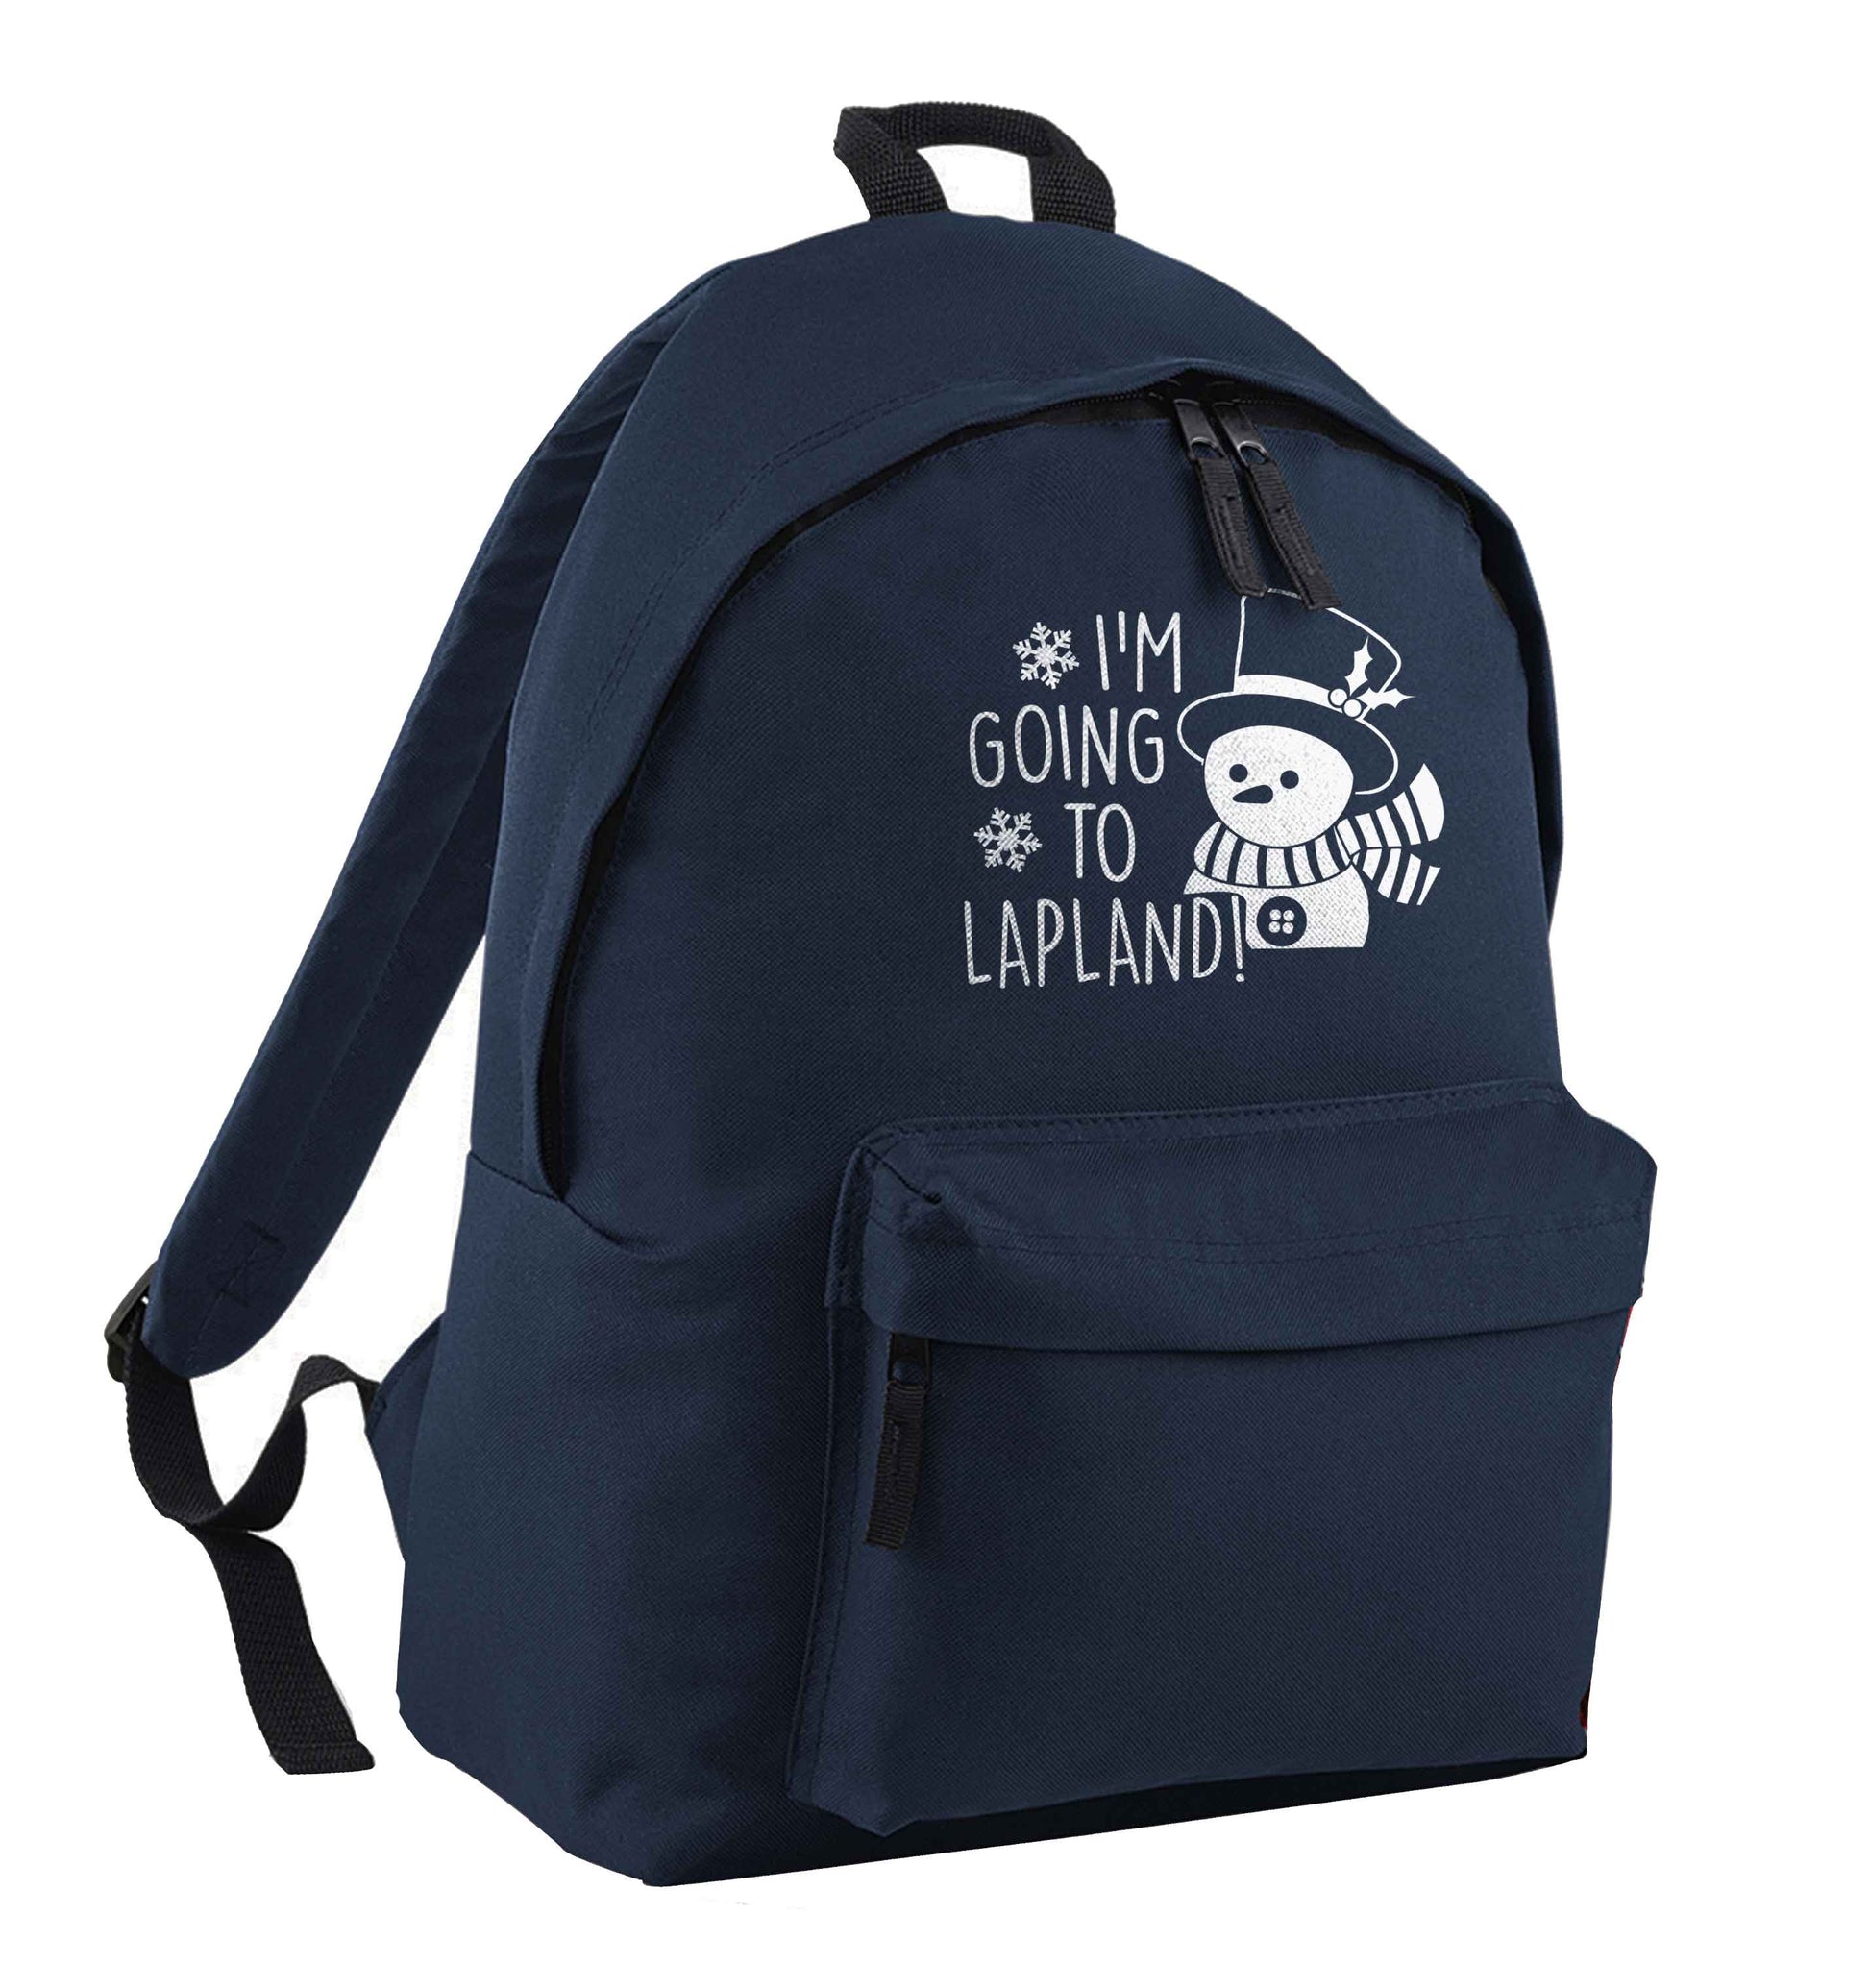 I'm going to Lapland navy children's backpack